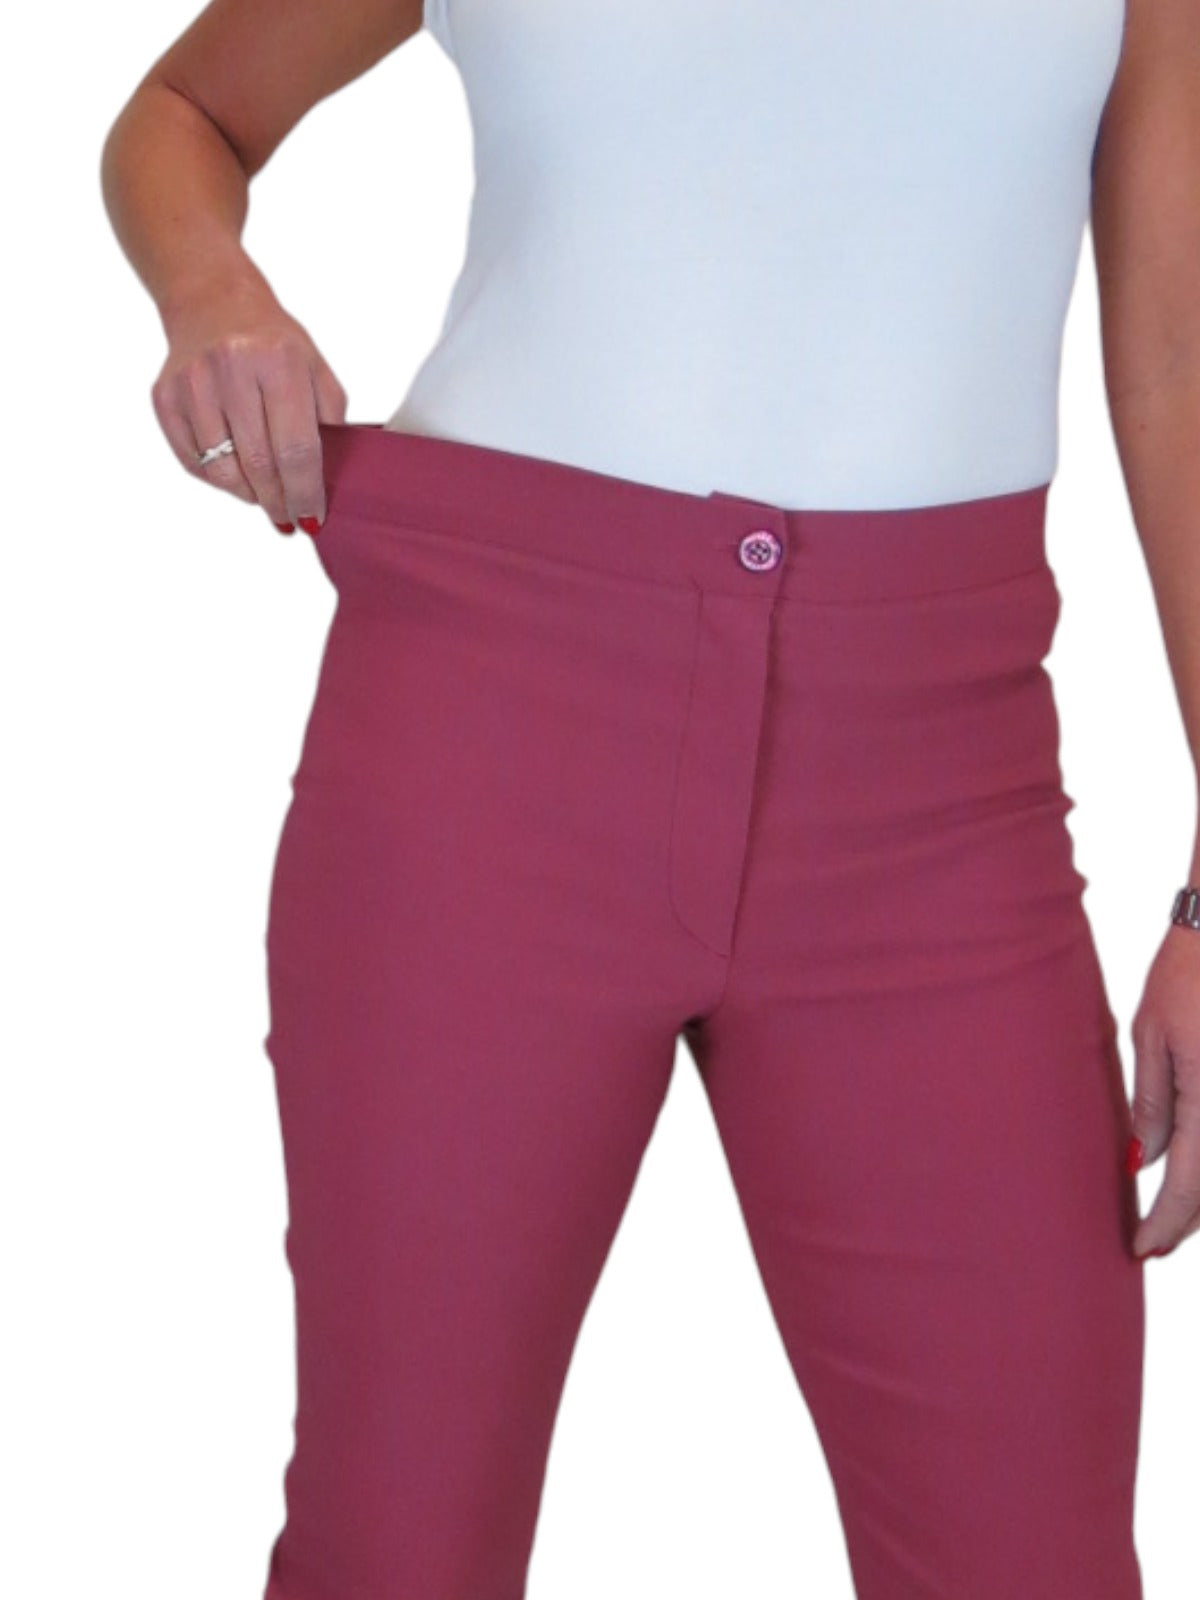 High Waisted Cropped Skinny Pedal Pushers Trousers Deep Rose